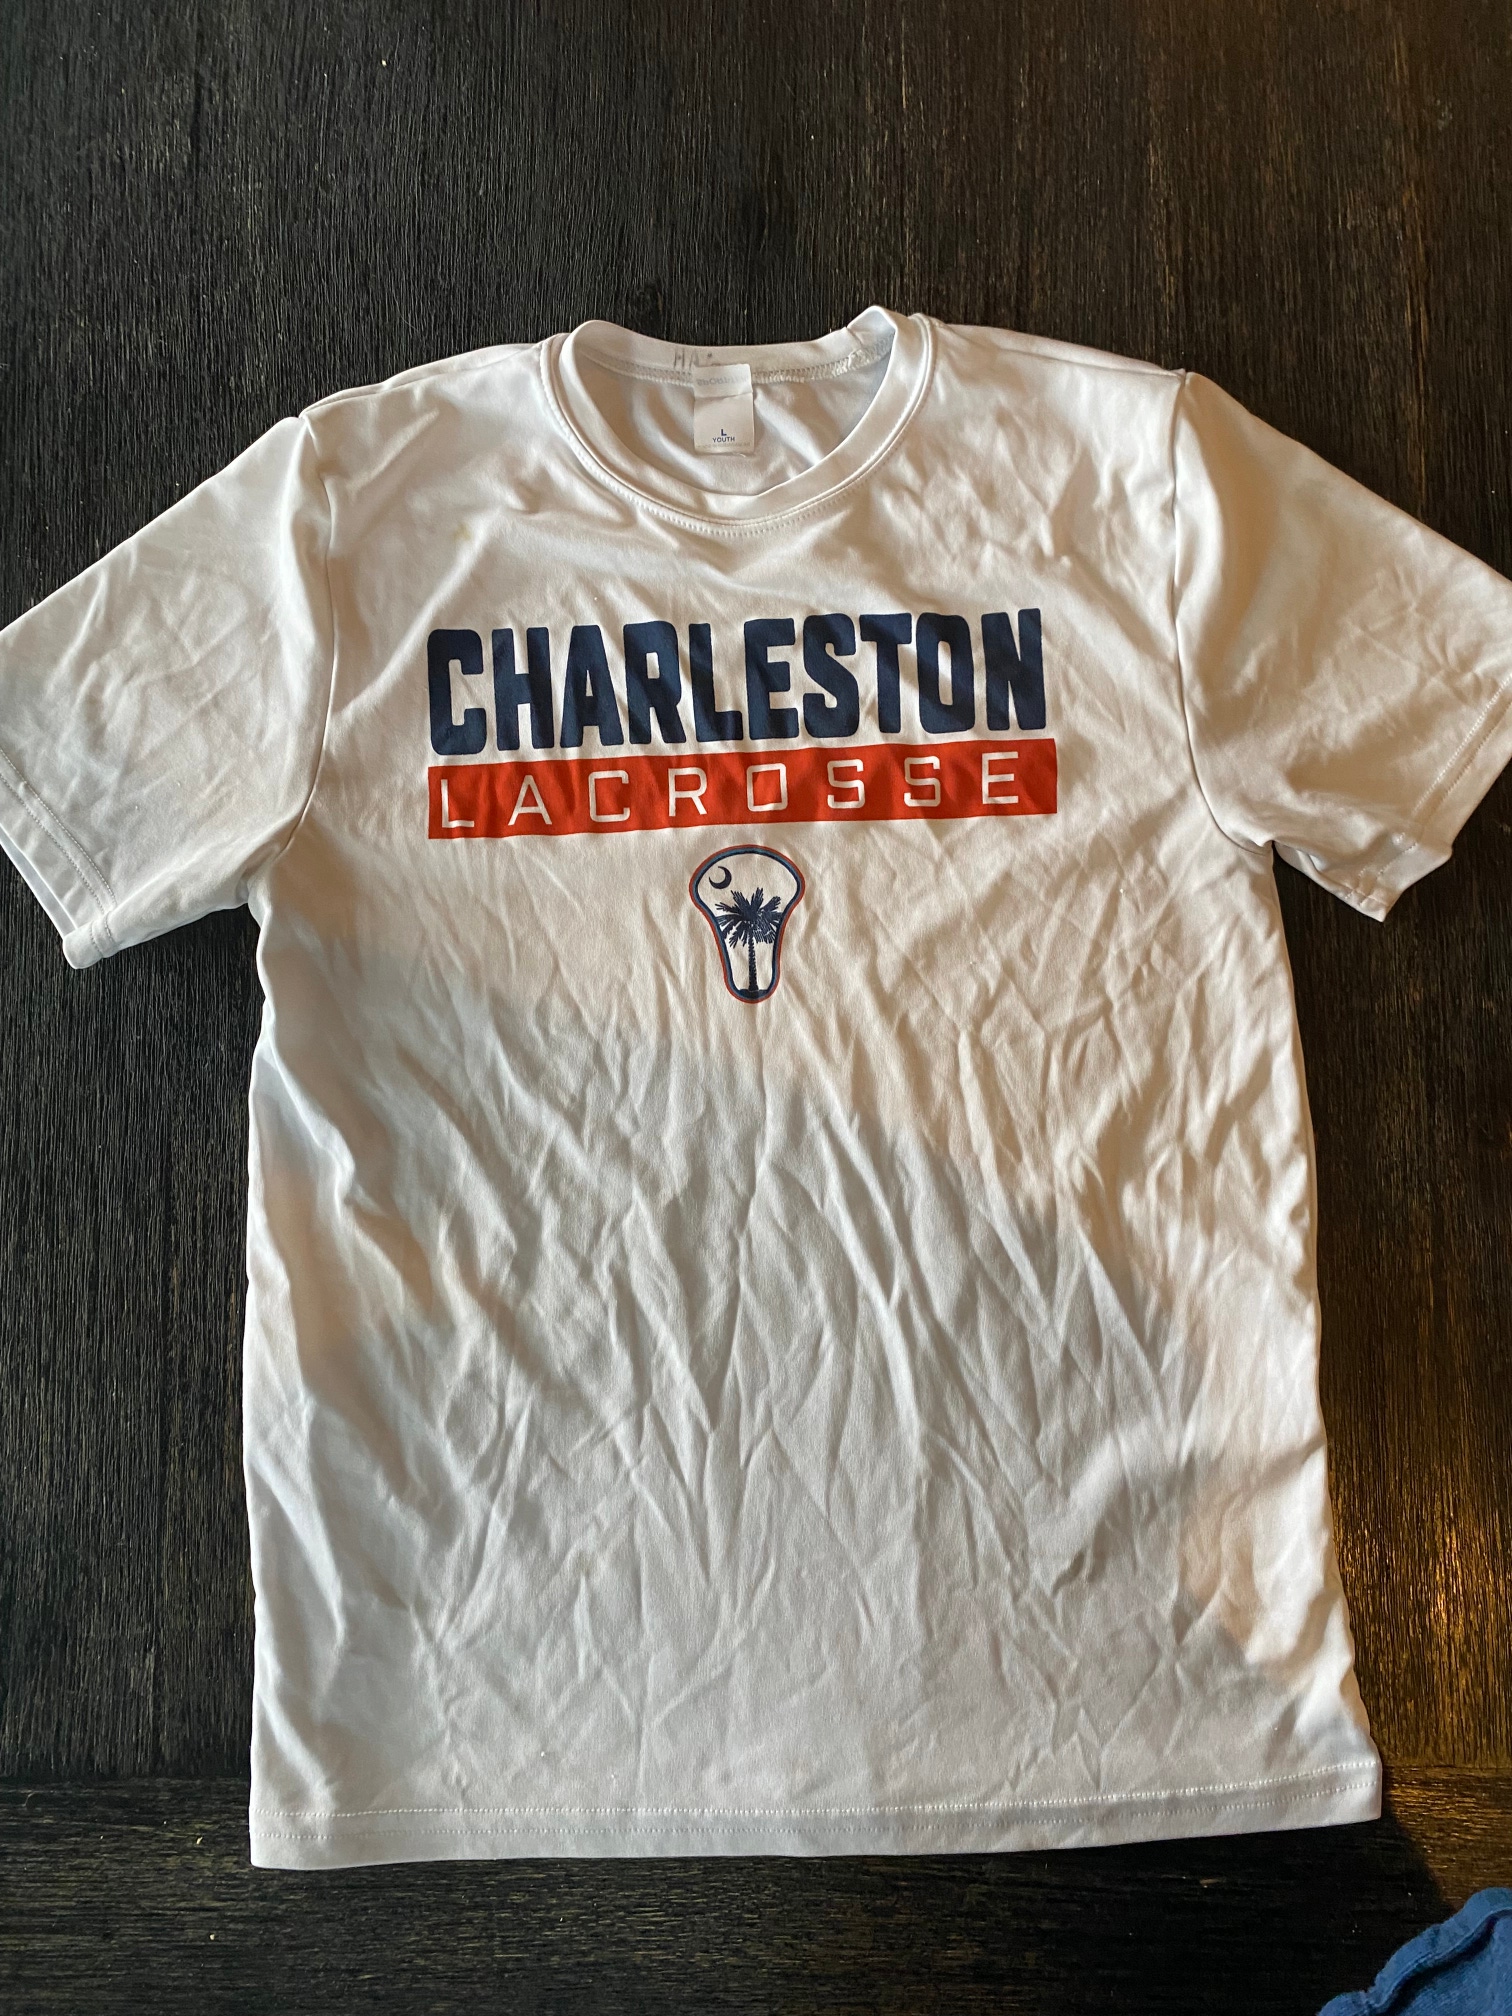 Charleston Elite Lacrosse Shooter Shirts Youth Large ($15 each or $25 for 2)